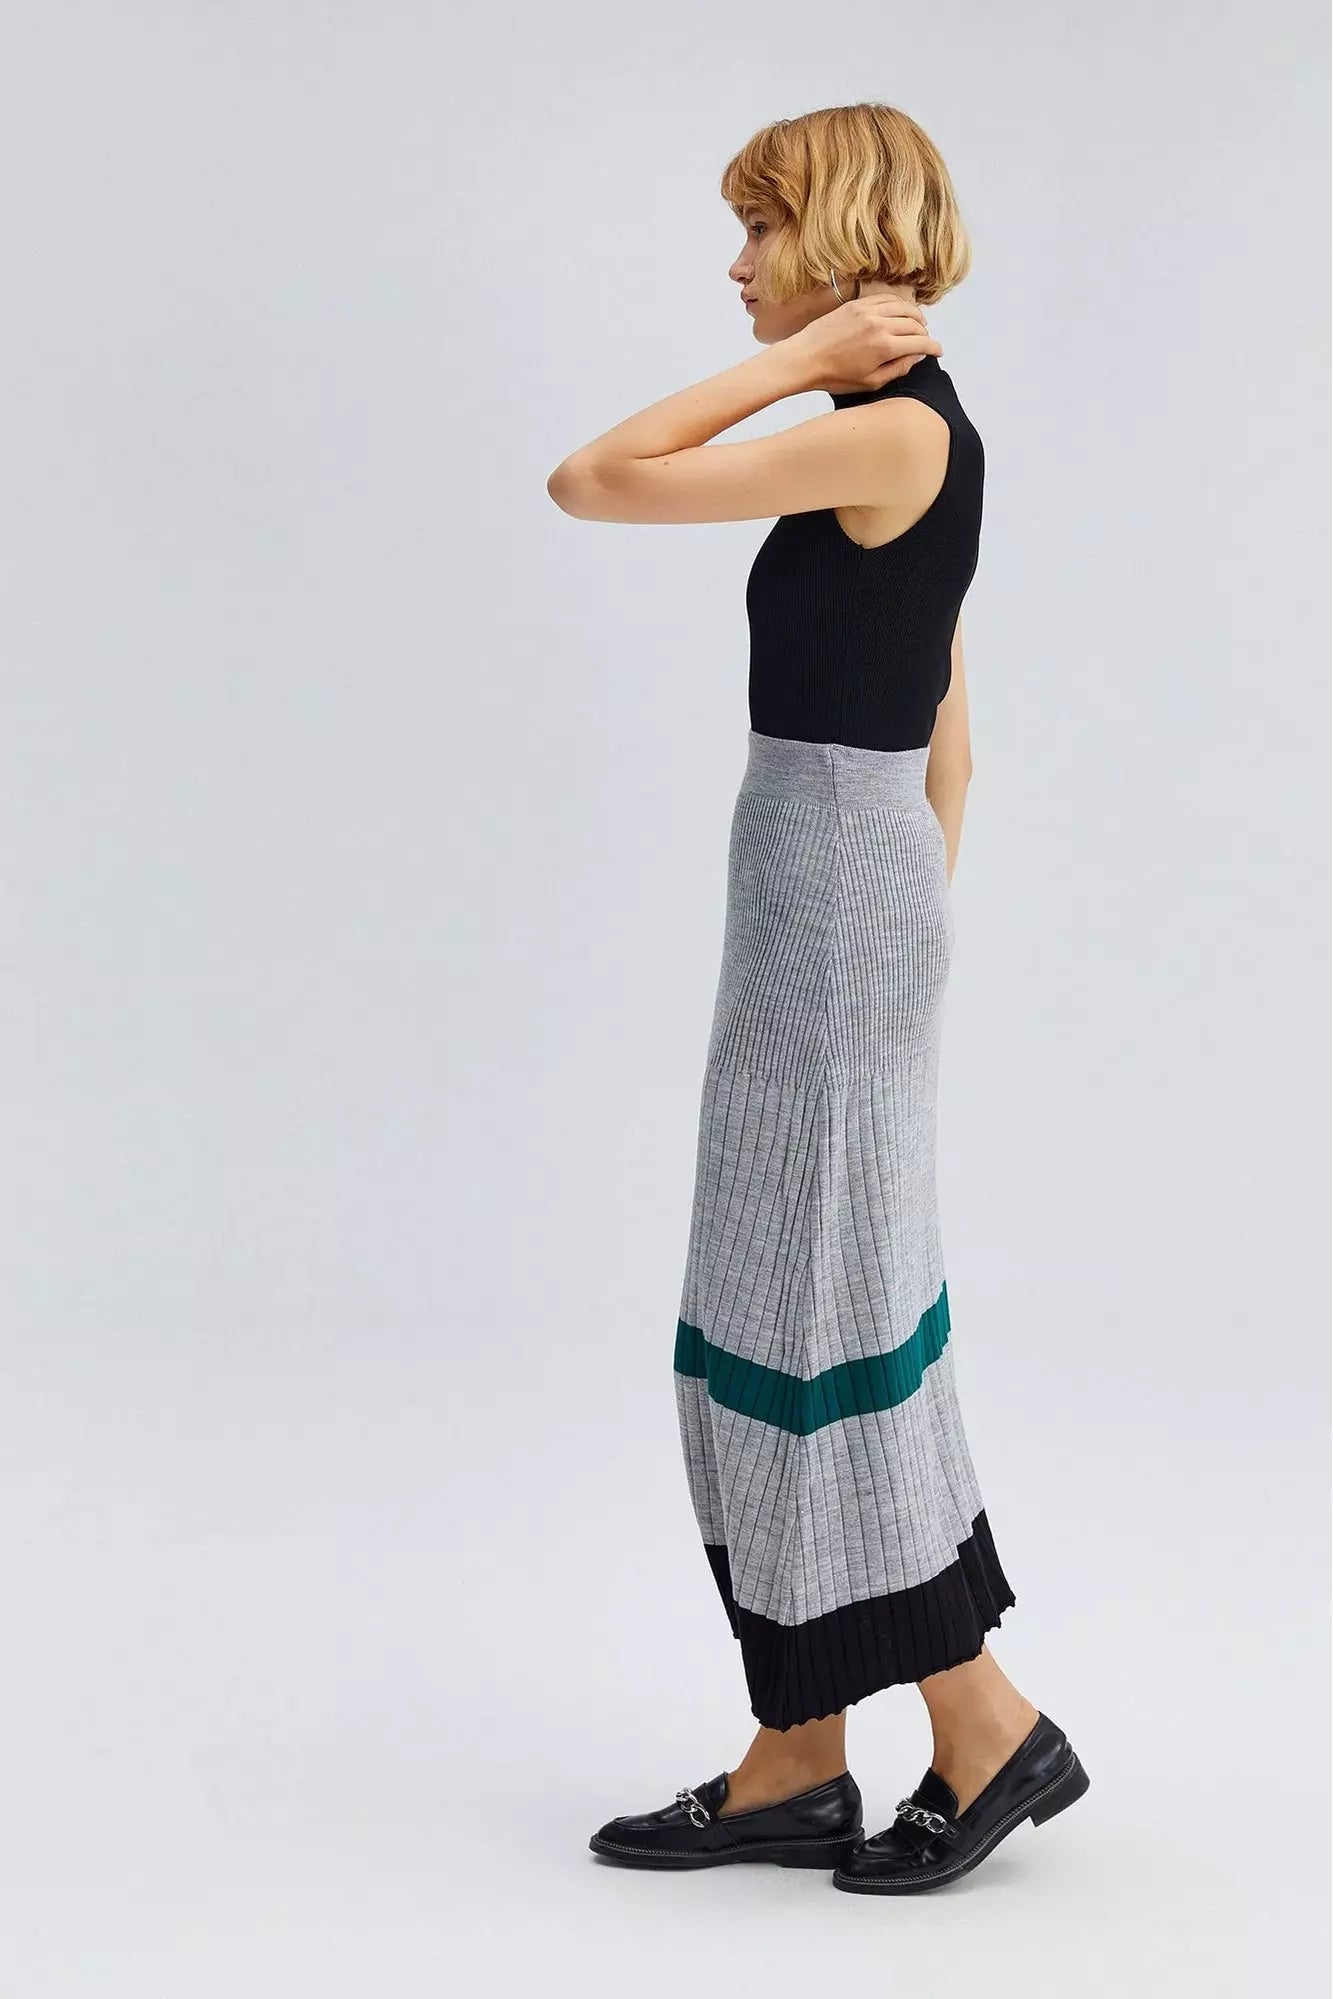 Knit Skirt - in Stripes - By Baano